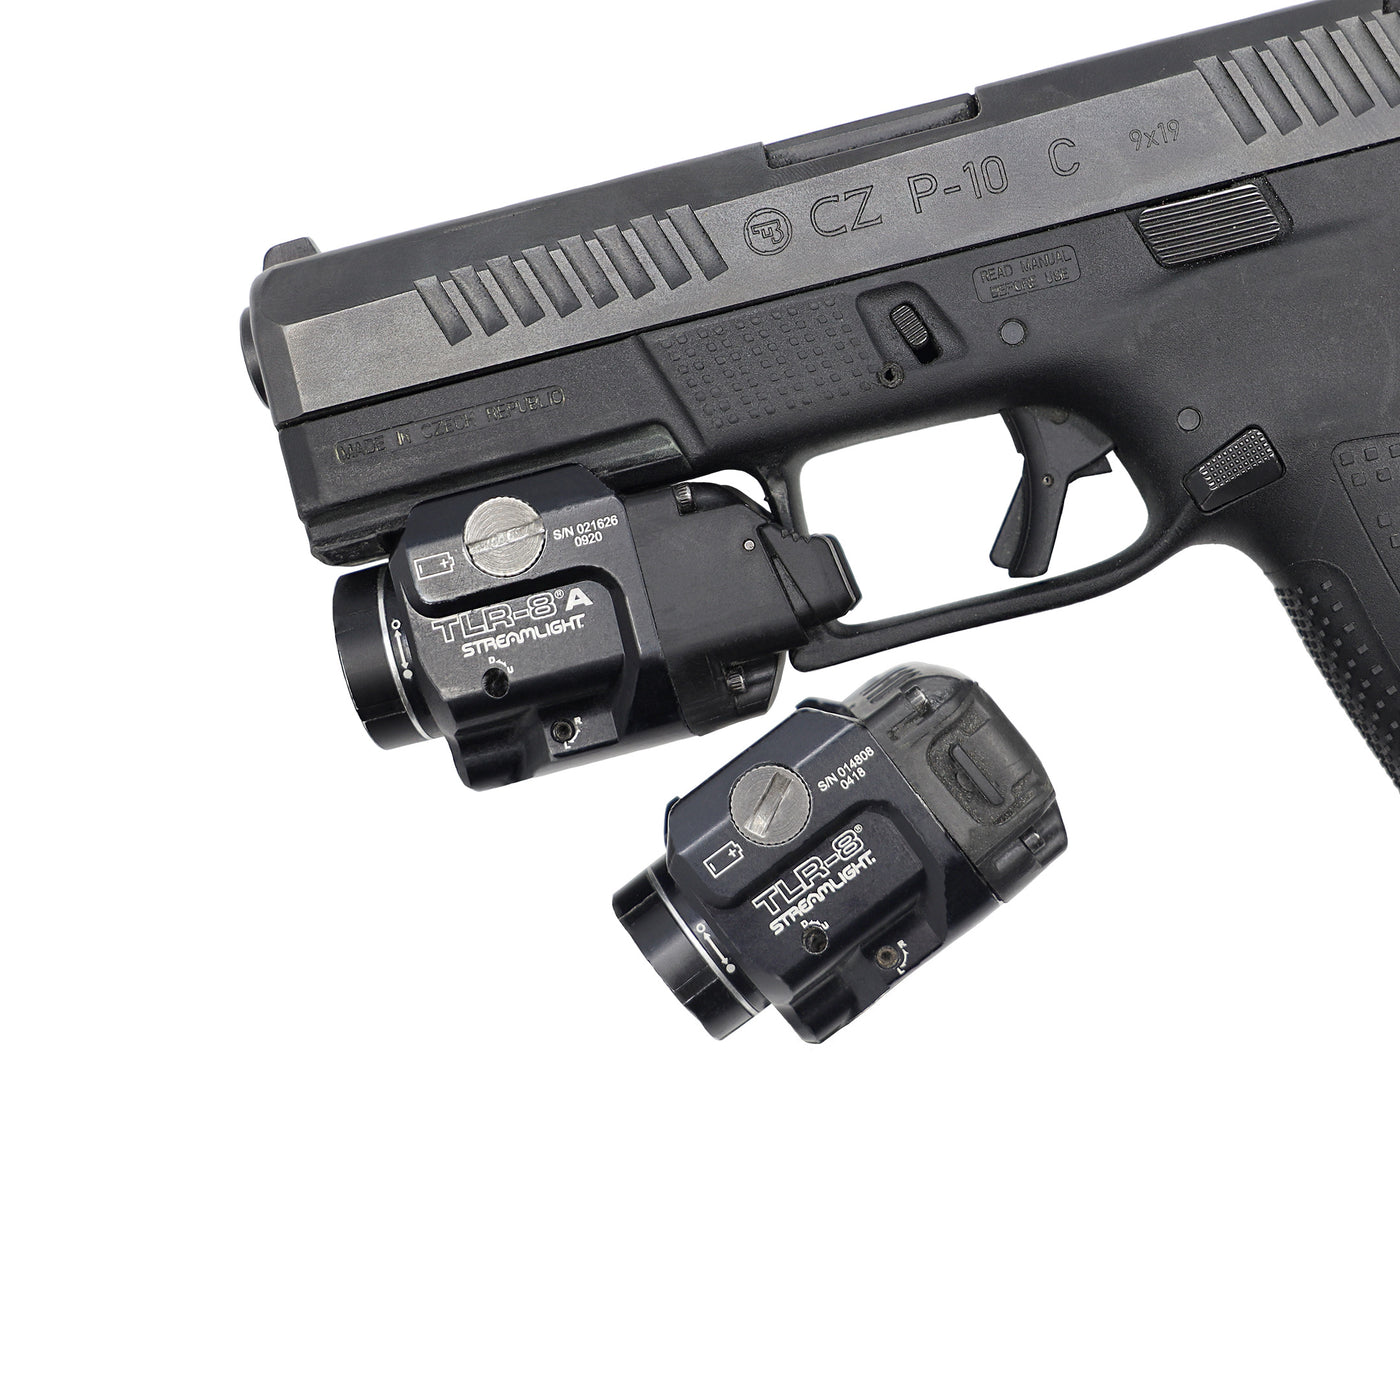 CZ P10/c firearm with streamlight TLR8 weapon light